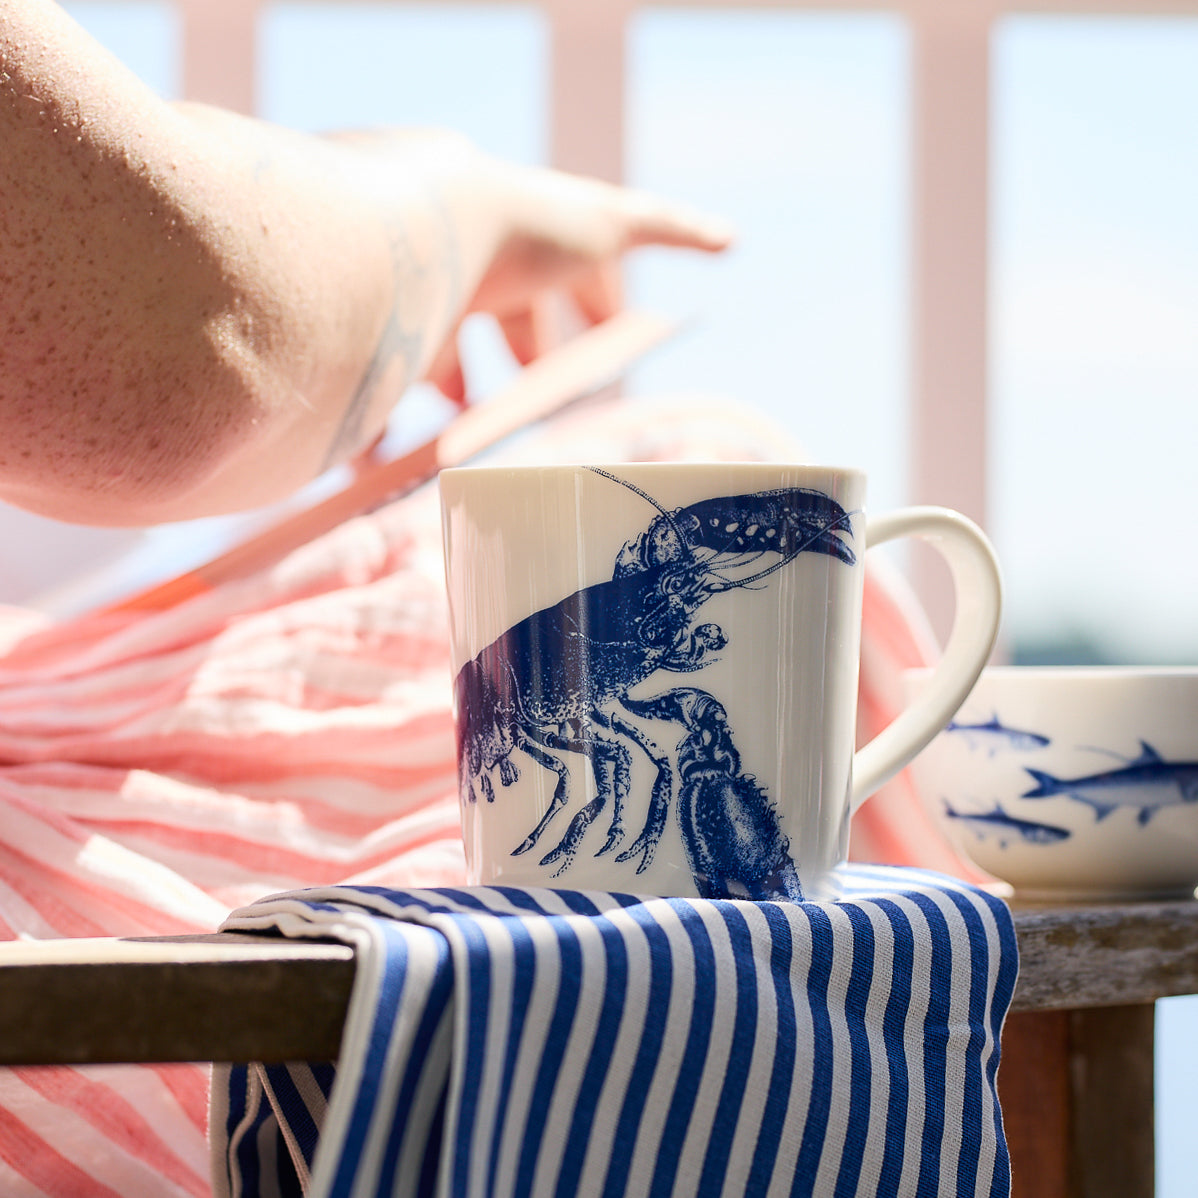 Lobster Mug by Caskata Artisanal Home featuring a blue illustration of a lobster on a plain background. Made in Sri Lanka with high-fired porcelain for durability and elegance.